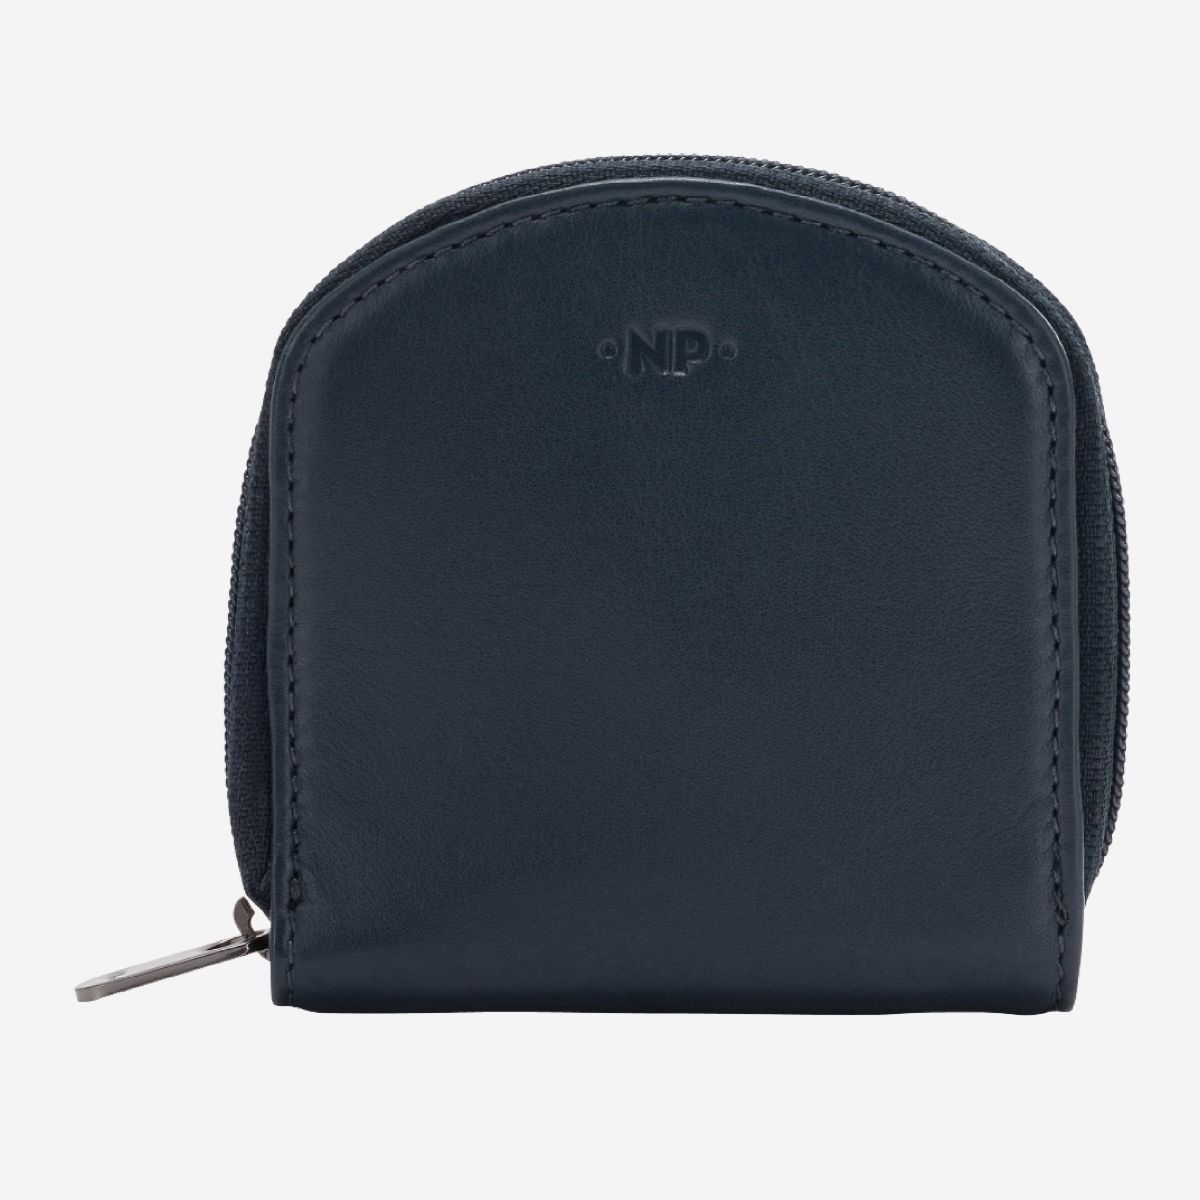 Leather Coin Purse - Blue